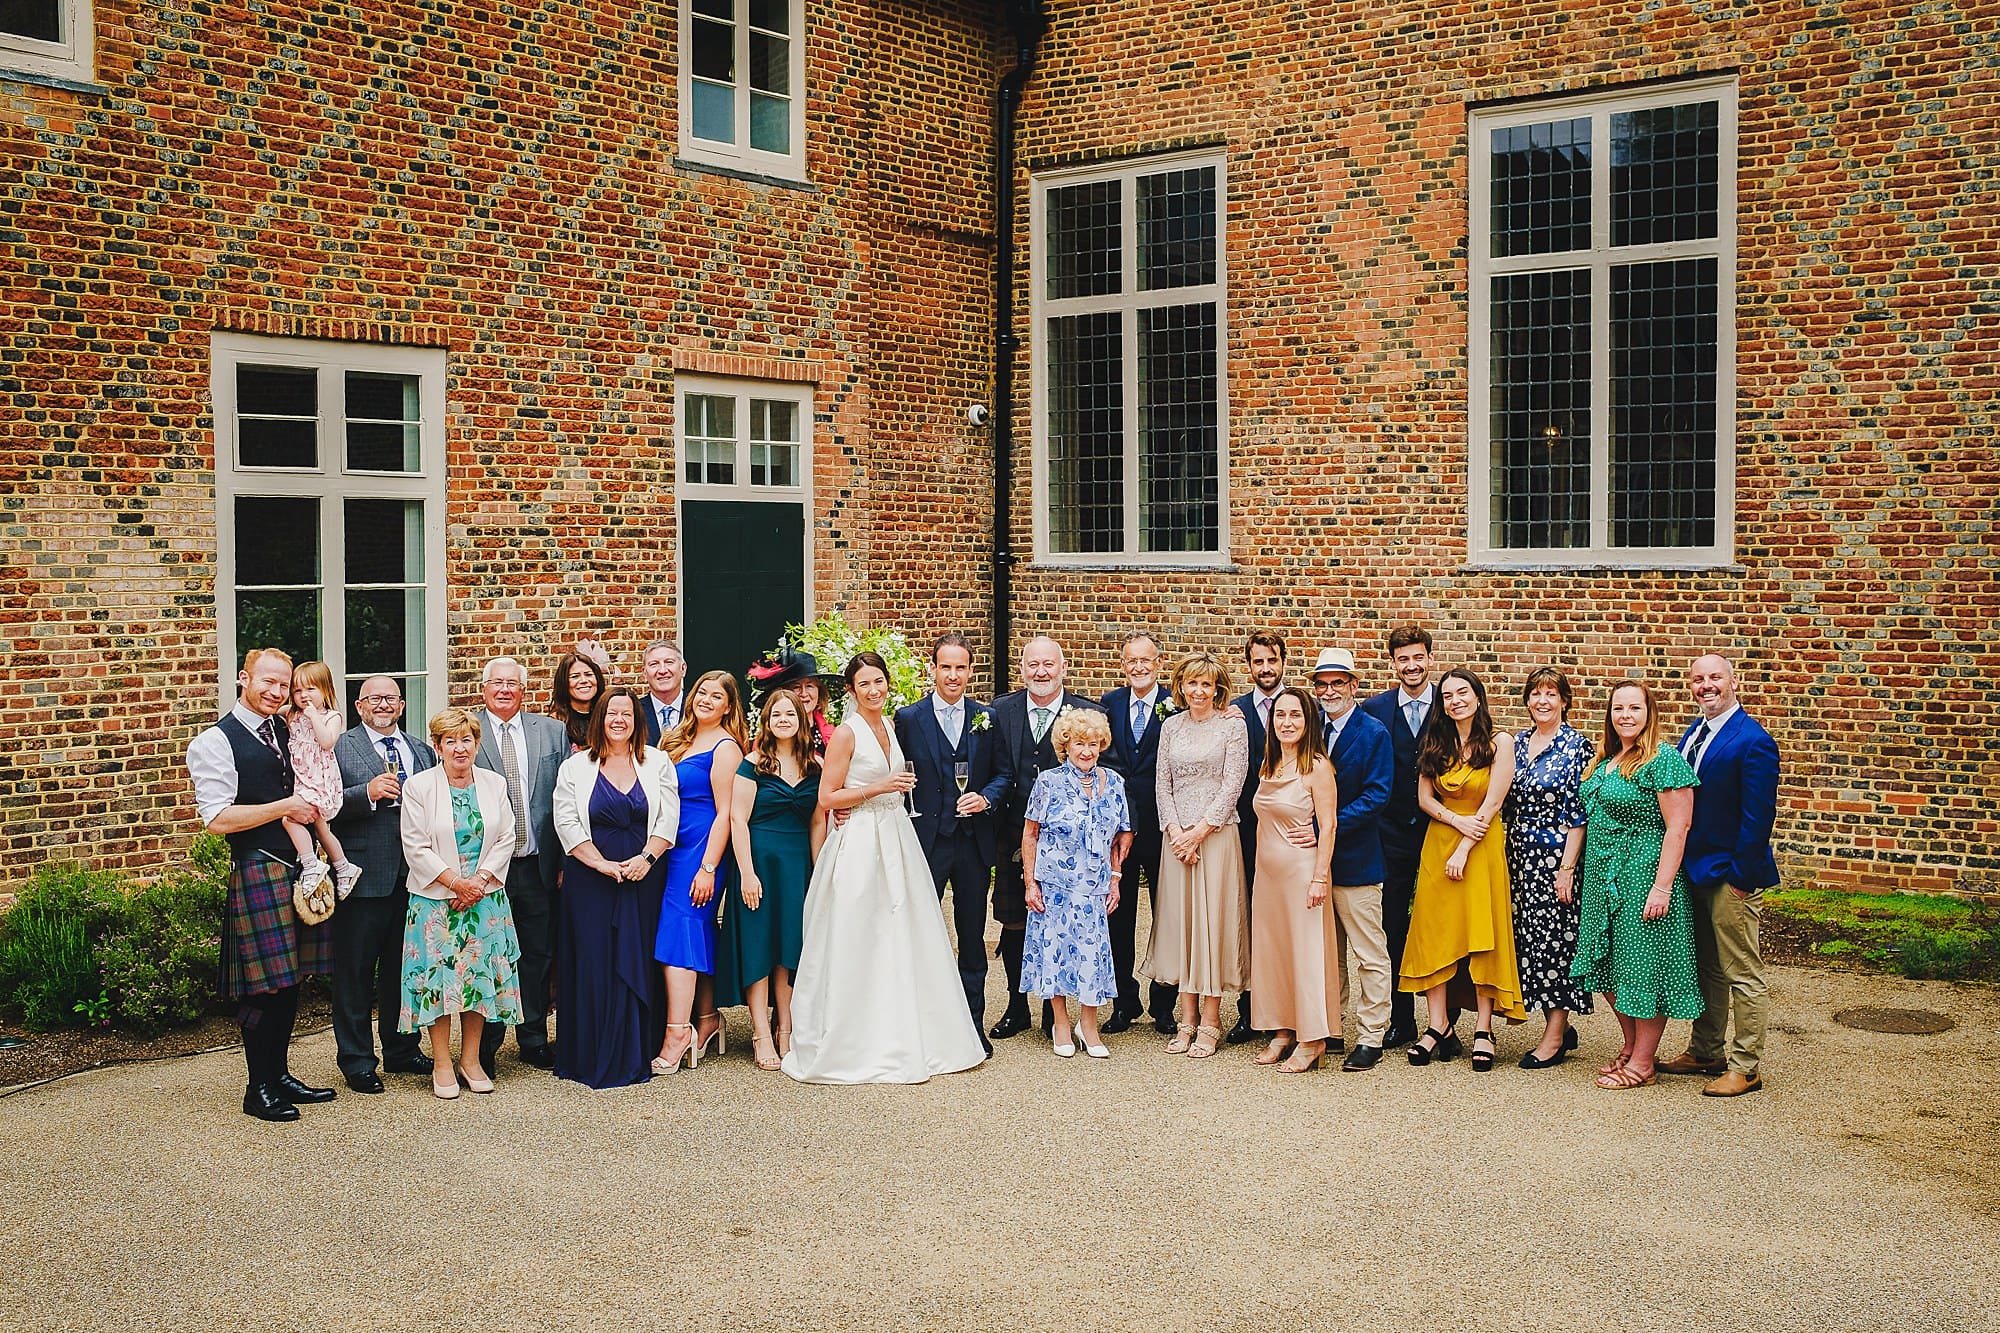 family portrait in Fulham Palace courtyard wedding reception